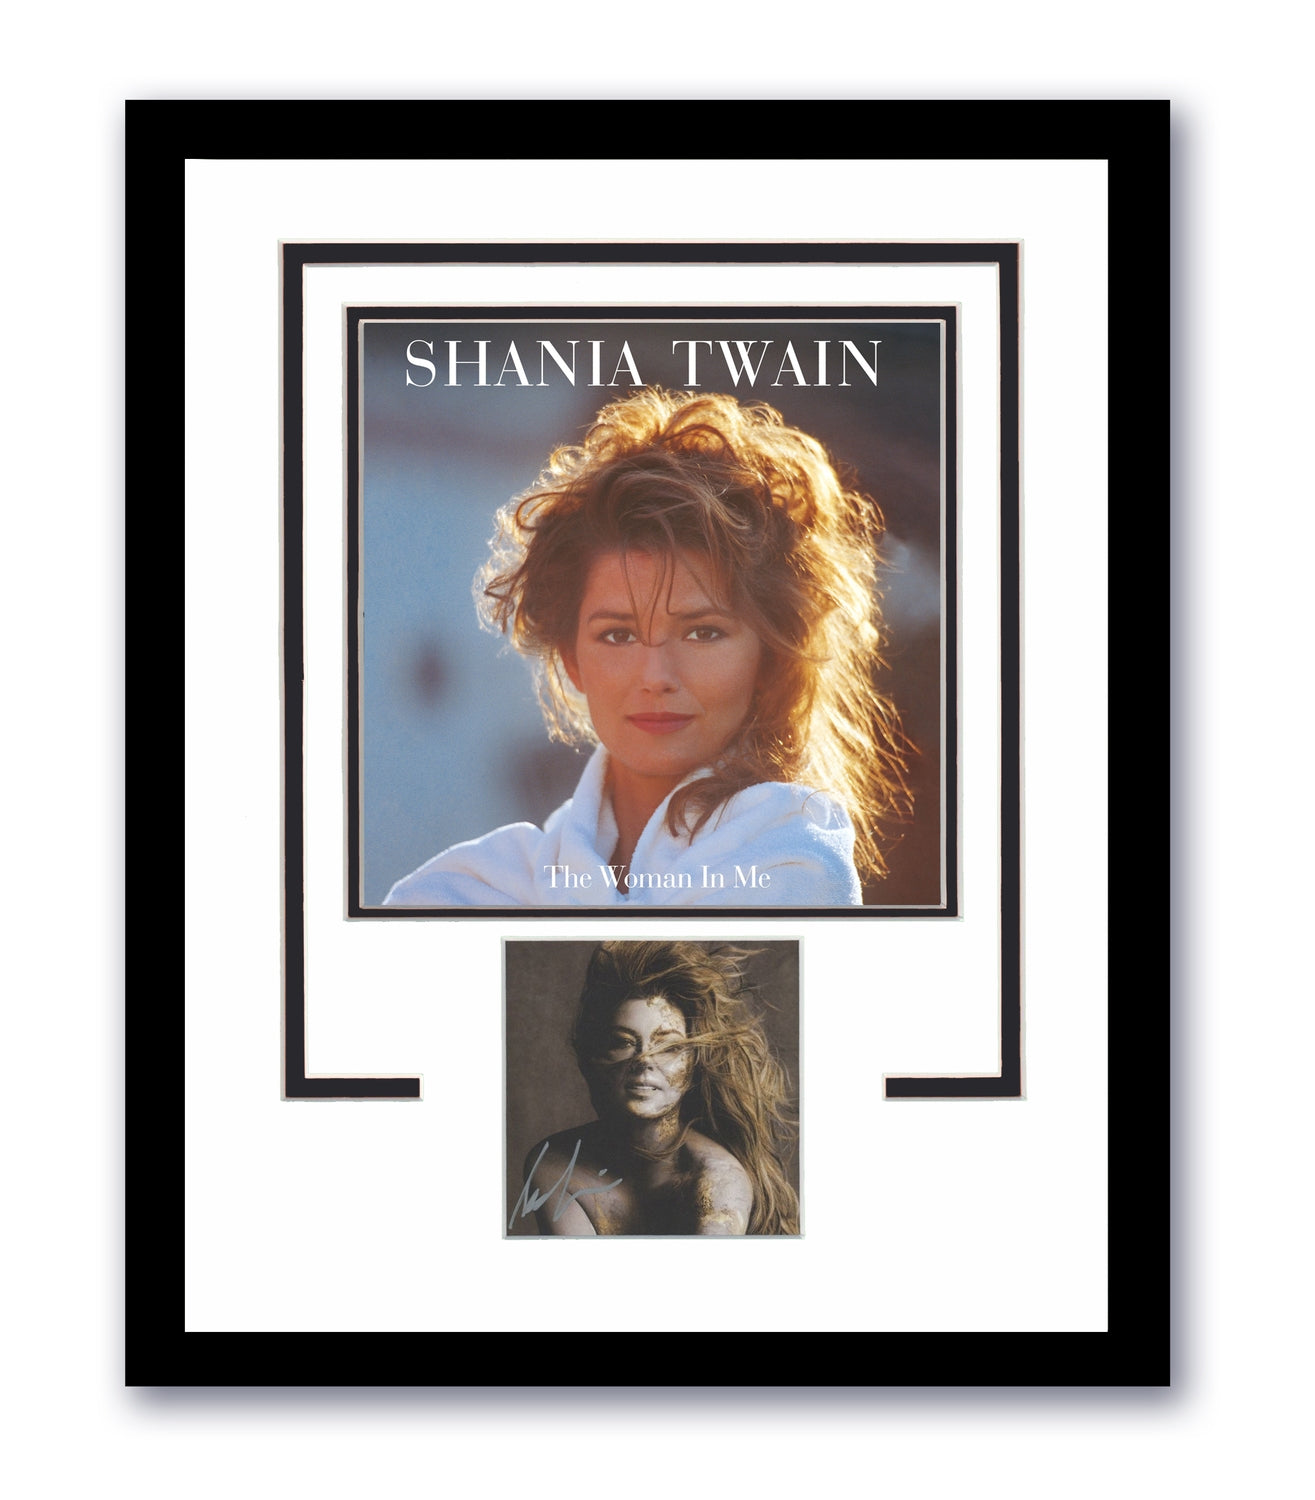 Shania Twain Autographed Signed 11x14 Custom Framed CD Queen of Me Country ACOA